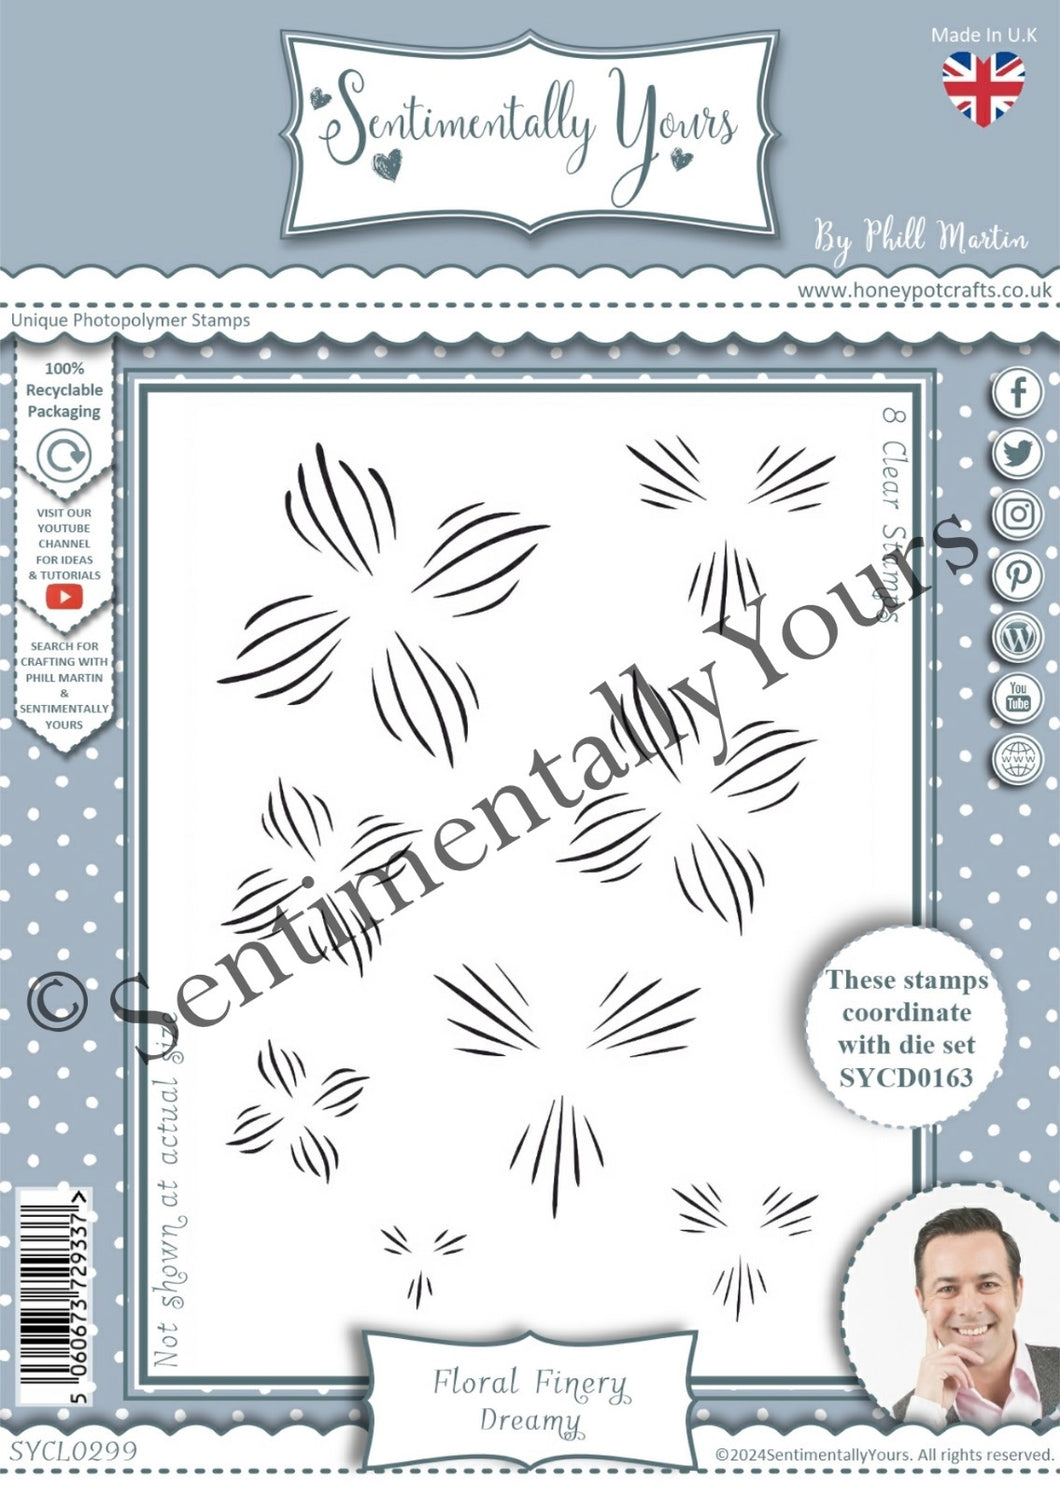 Phill Martin Sentimentally Yours A6 Clear Stamp - Floral Finery : Dreamy